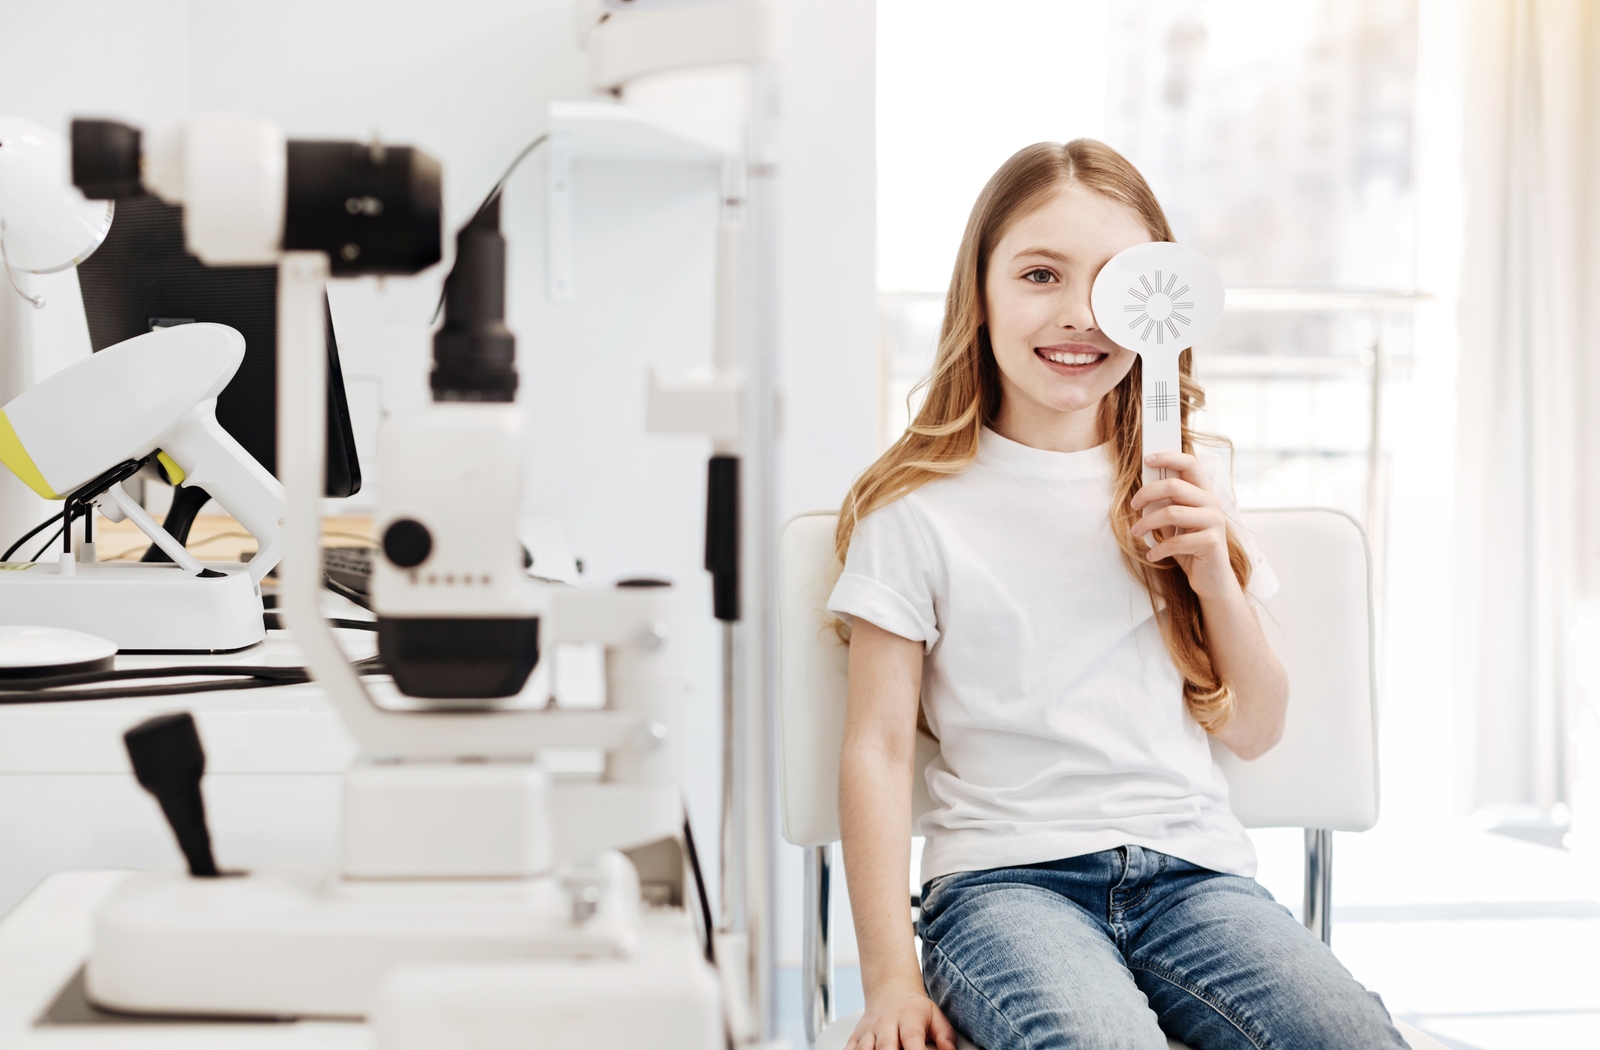 Young smiling girls in a chair at the optometrist's office as she uses an occluder.